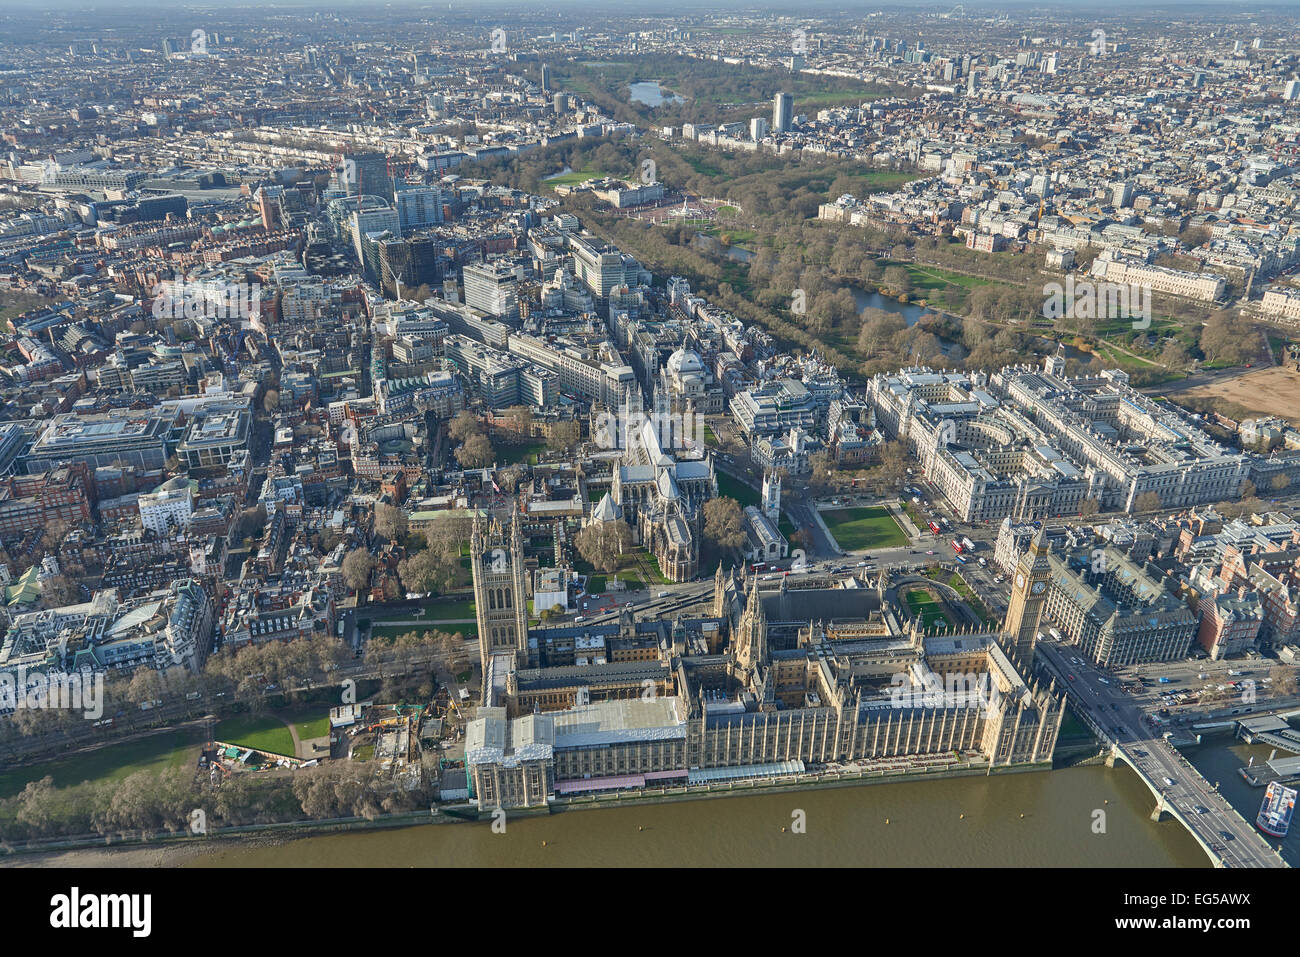 An aerial view of the Houses of Parliament with Westminster Abbey, Green Park and Hyde Park visible in the background Stock Photo